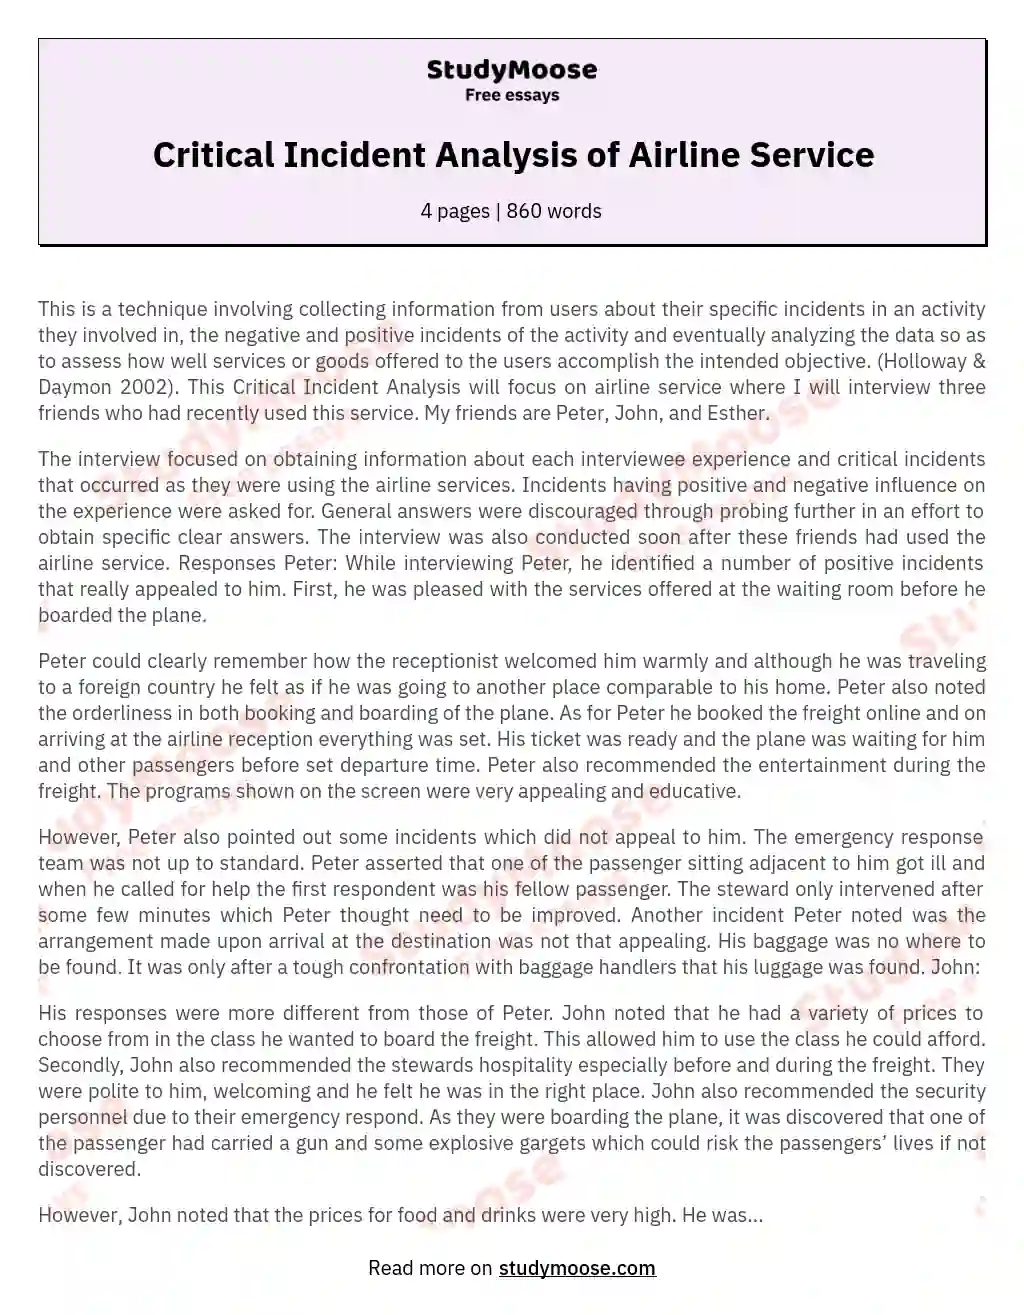 Critical Incident Analysis of Airline Service essay